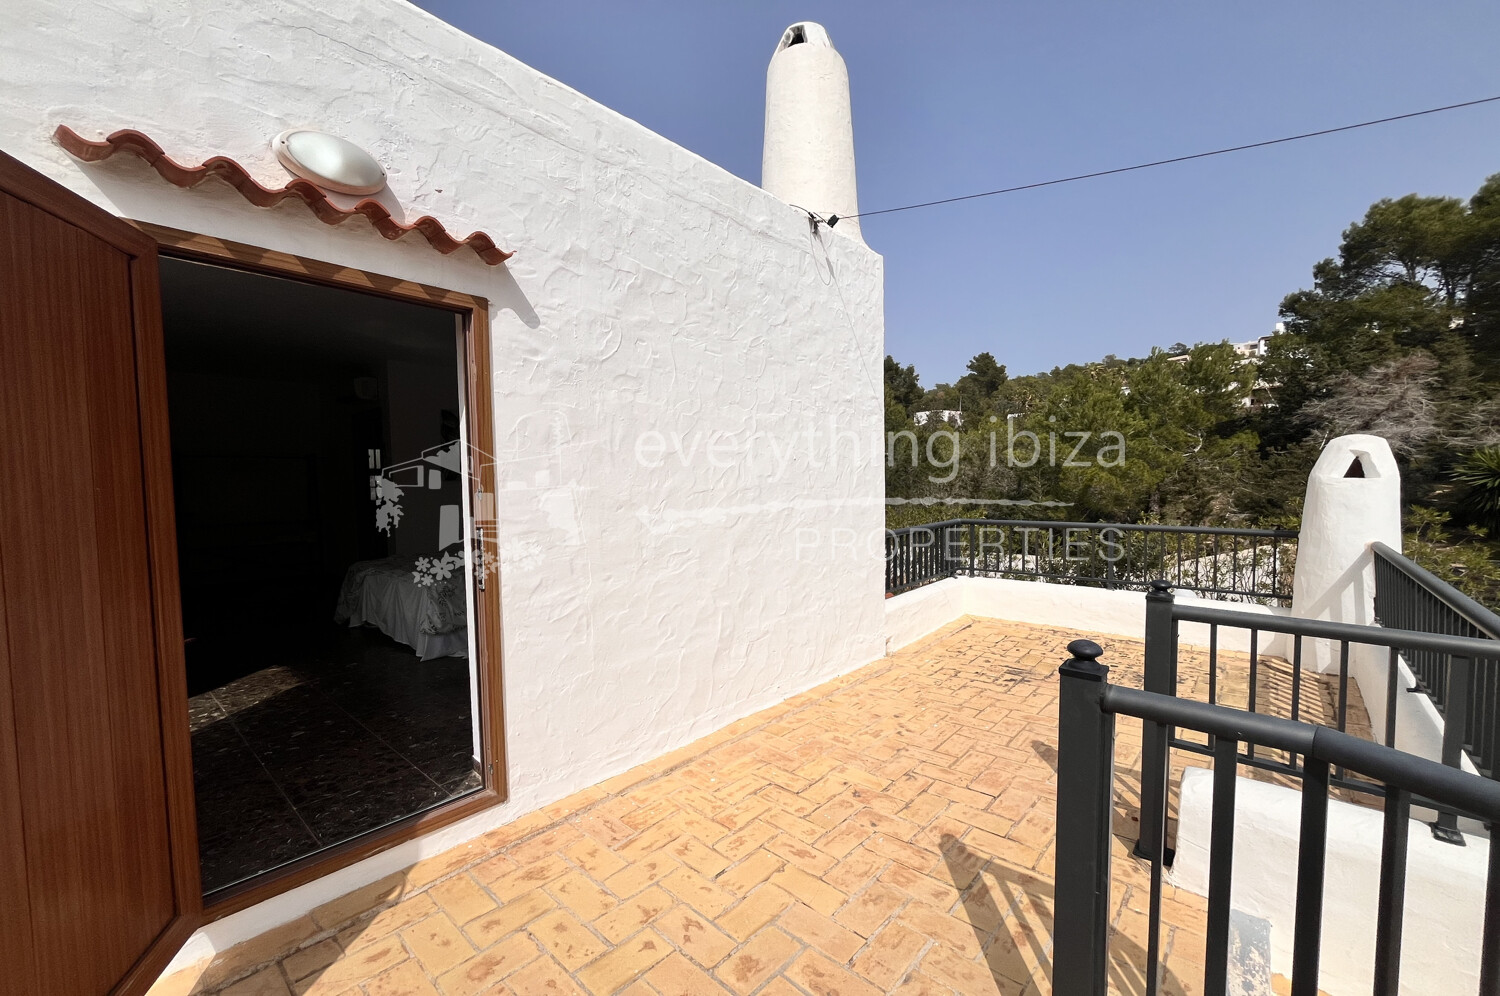 Charming Traditional Villa with Tourist License, Sea & Sunset Views, ref. 1682, for sale in Ibiza by everything ibiza Properties